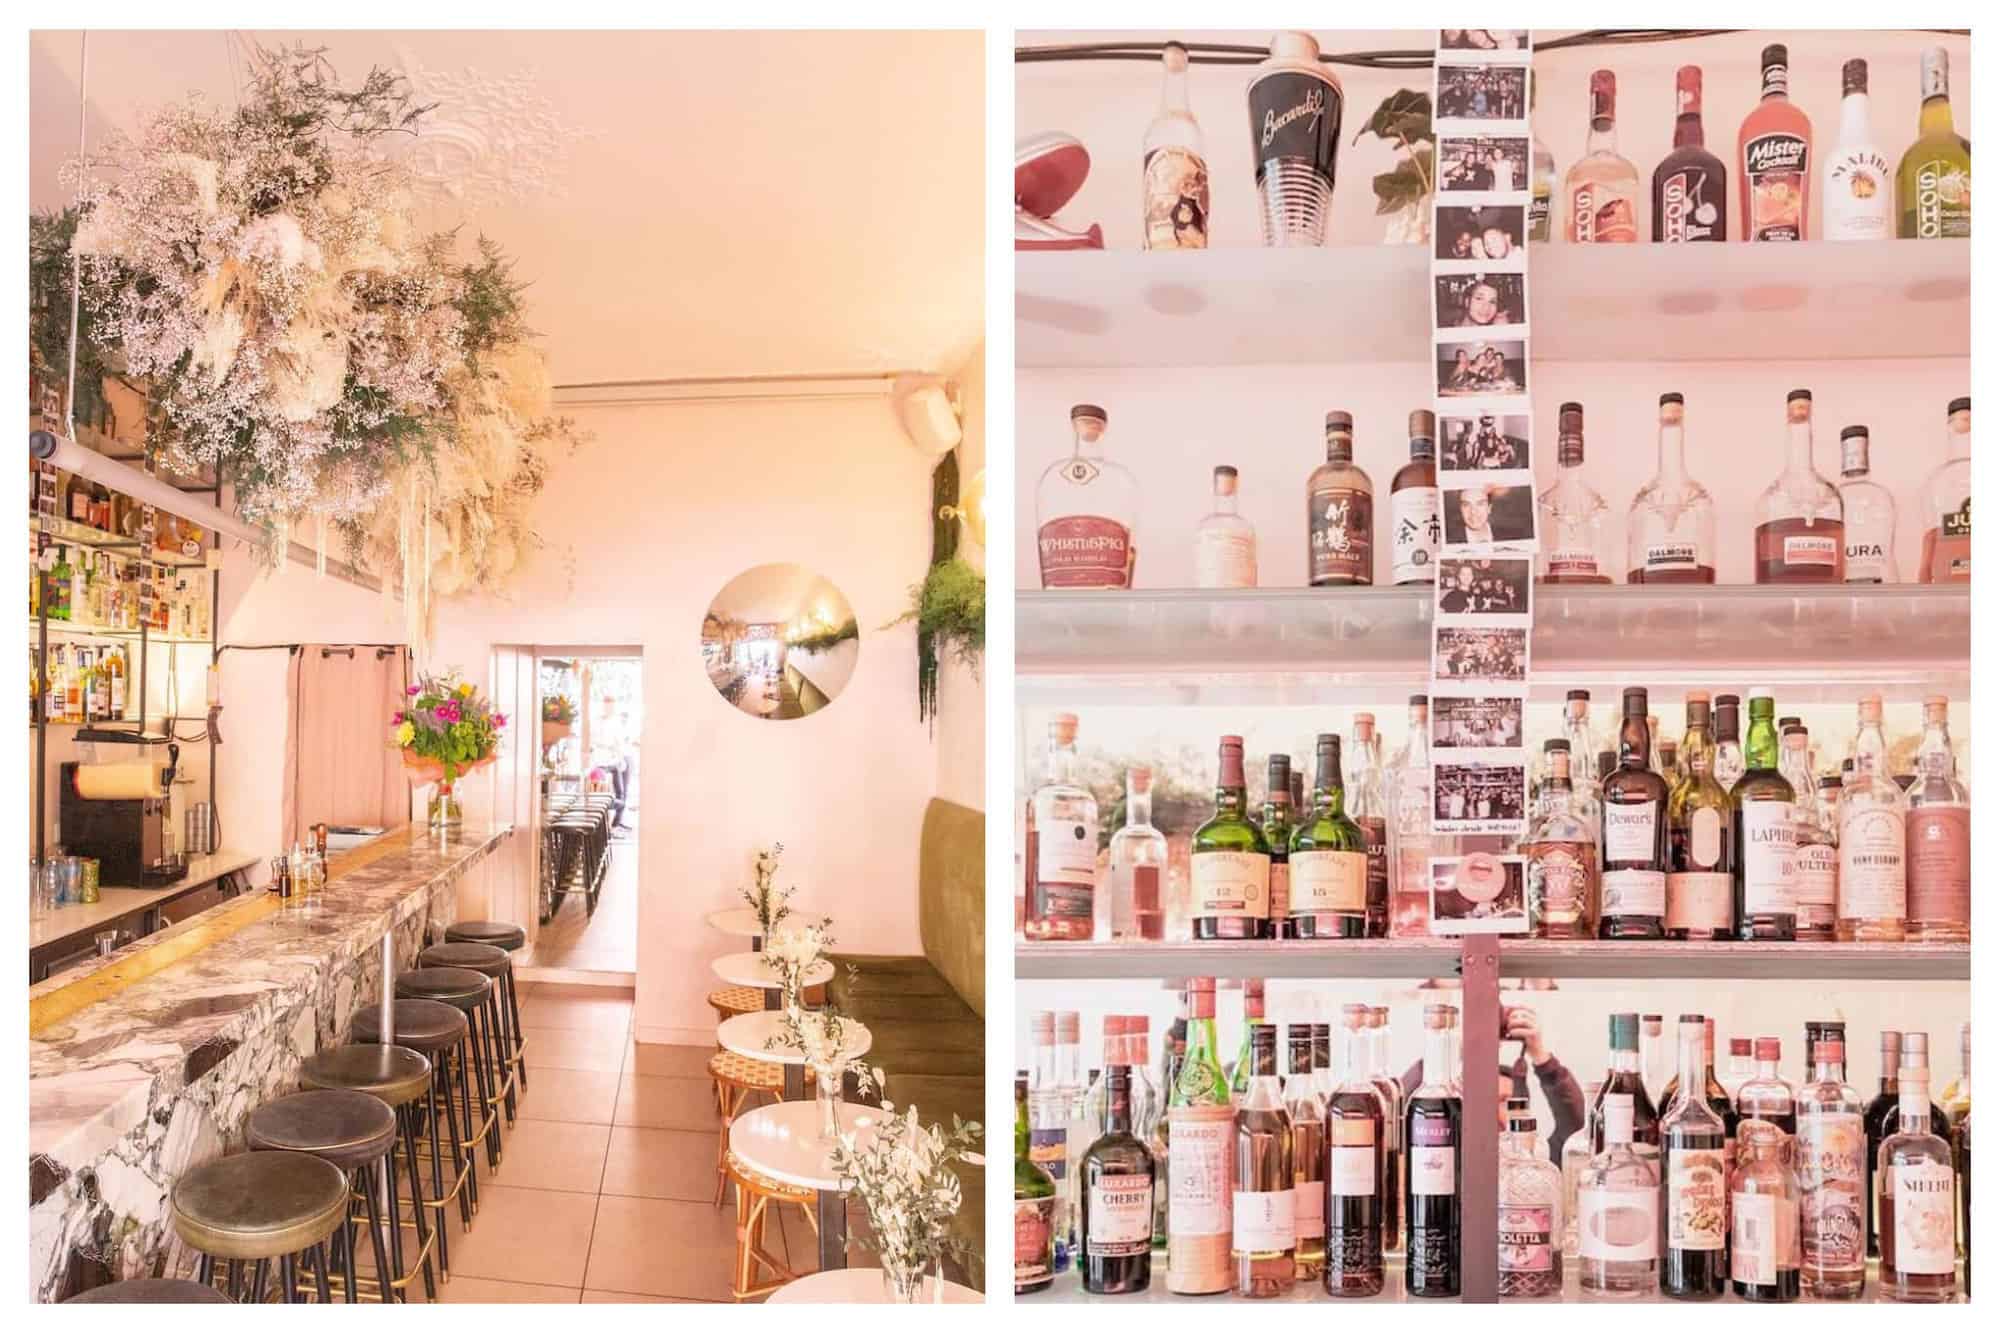 Left: the interior of "Bisou." It is bright and there are flowers throughout. A bar with several stools is visible to the left and tables and other stools are to the left. Right: Behind the bar at "Bisou." There are several bottles of alcohol as well as polaroid pictures.